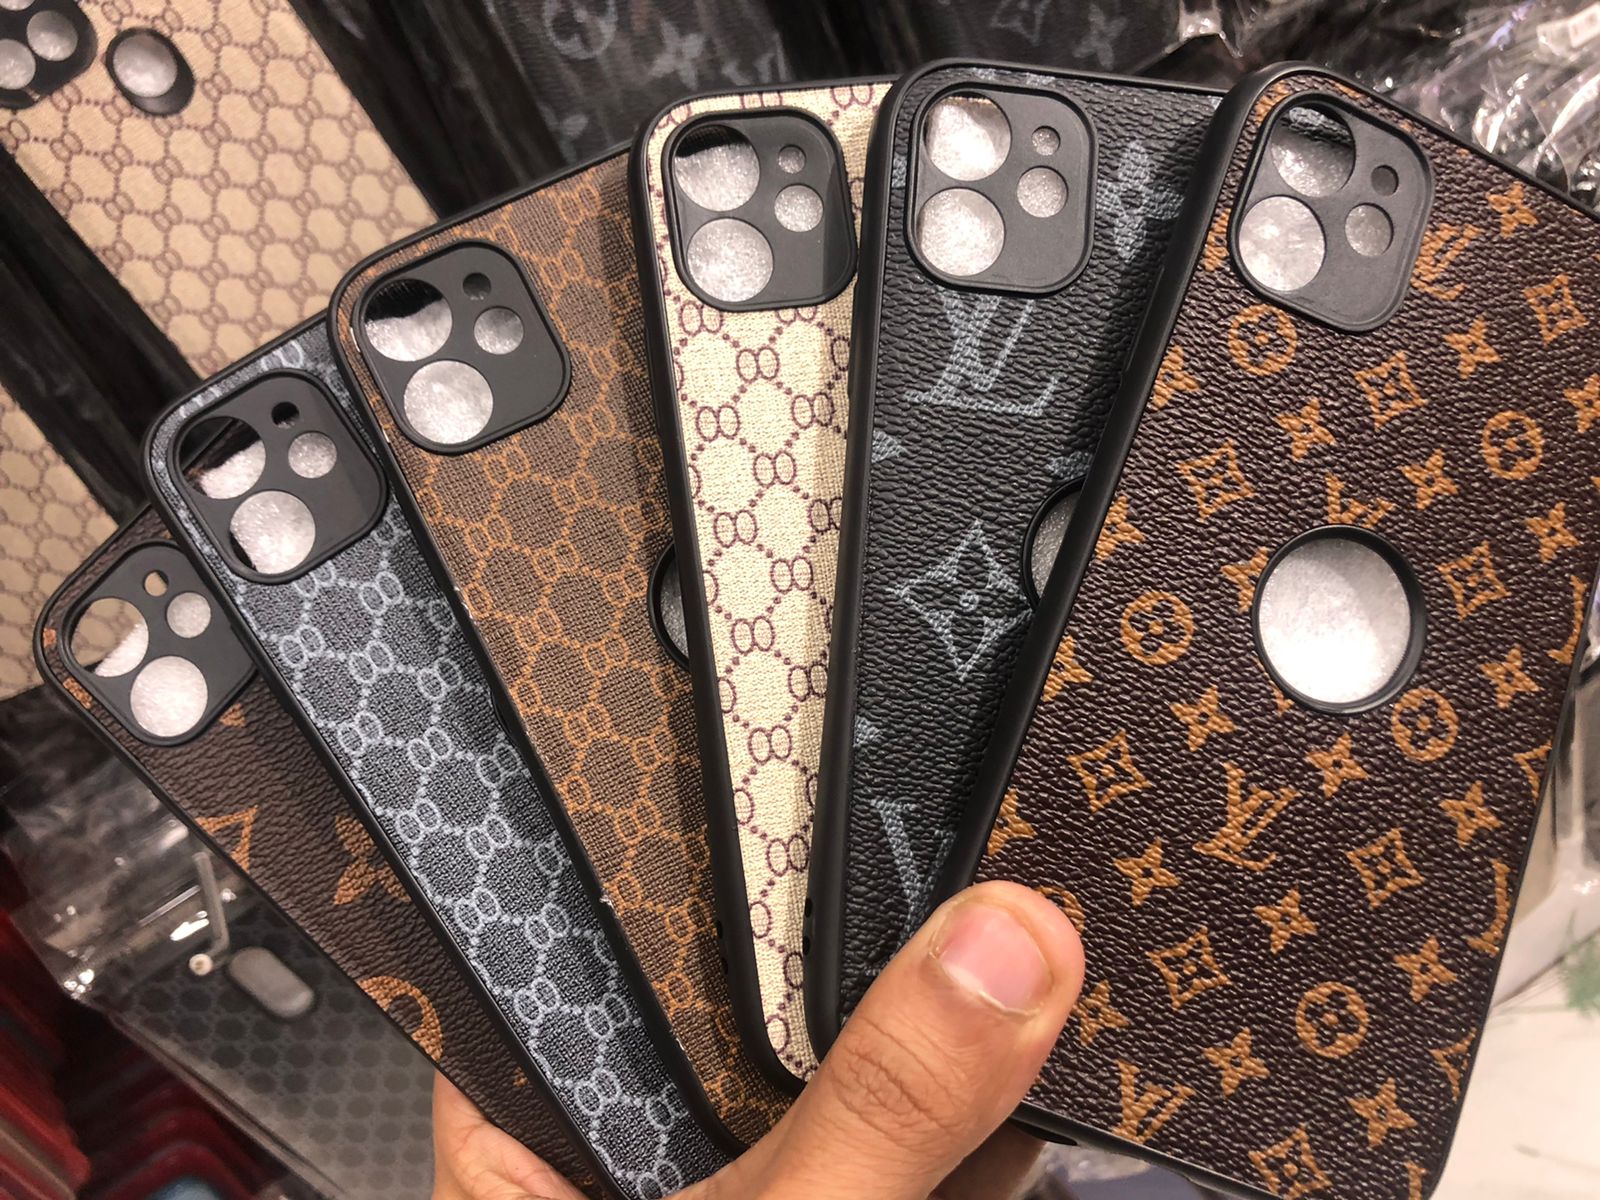 lv cell phone cases & covers